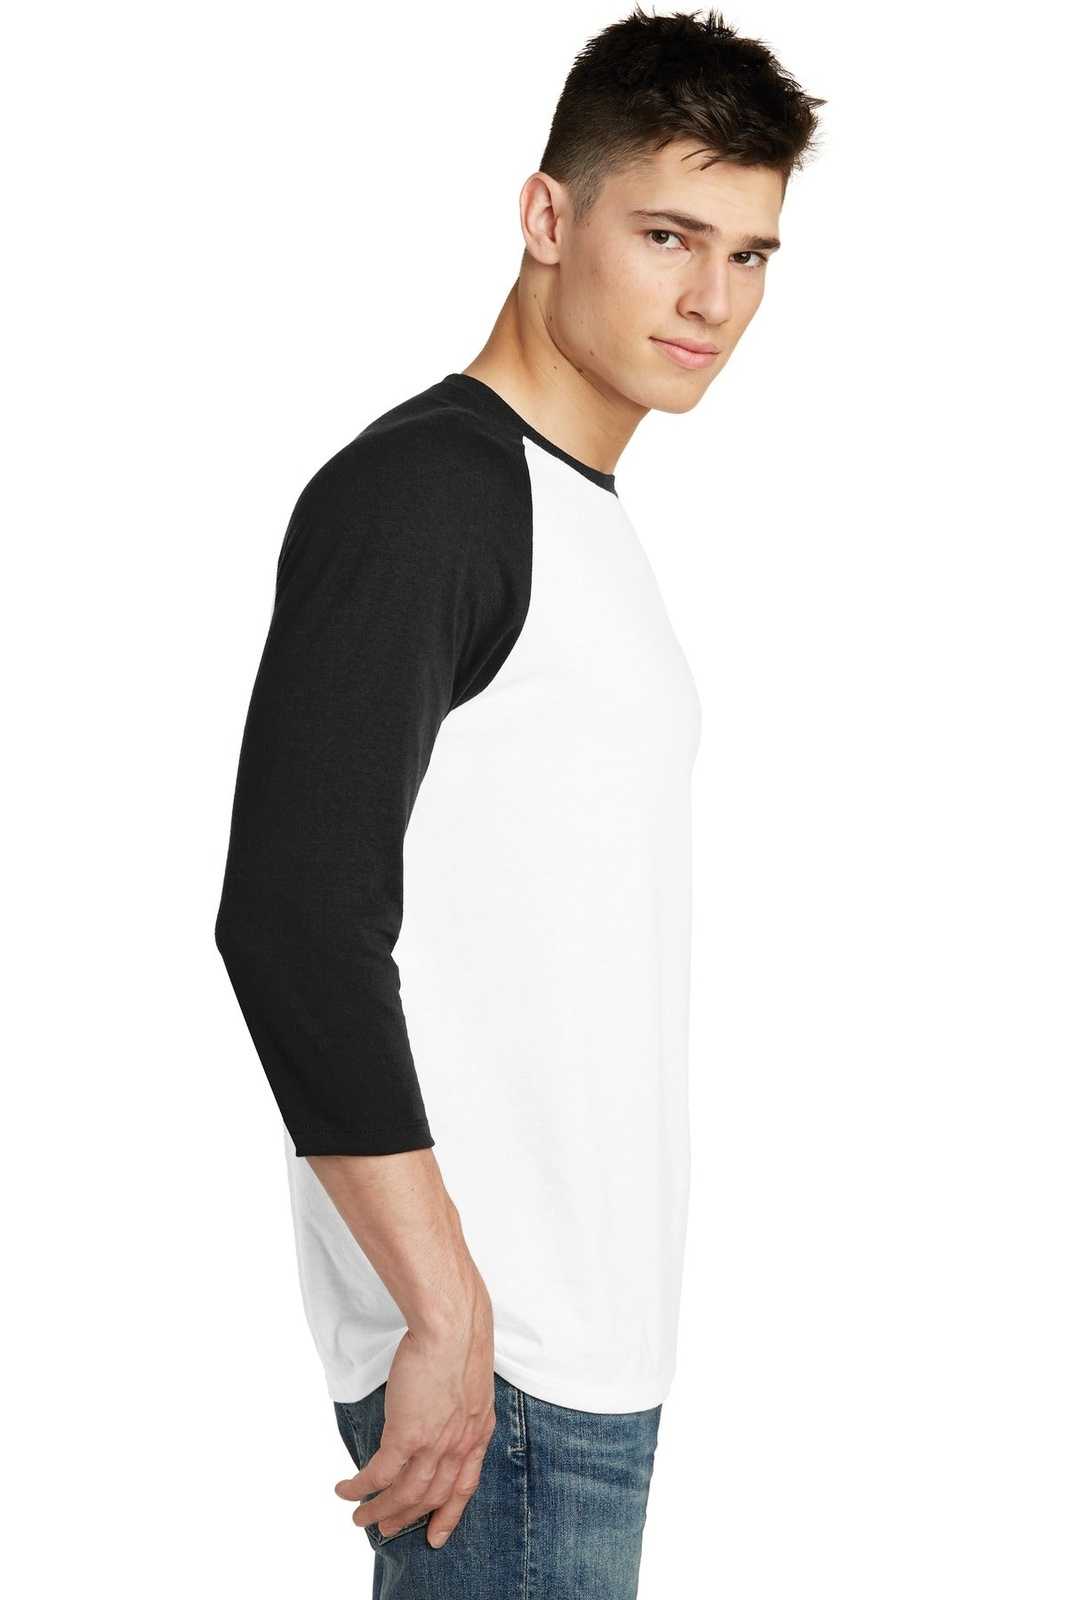 District DT6210 Very Important Tee 3/4-Sleeve Raglan - Black White - HIT a Double - 3